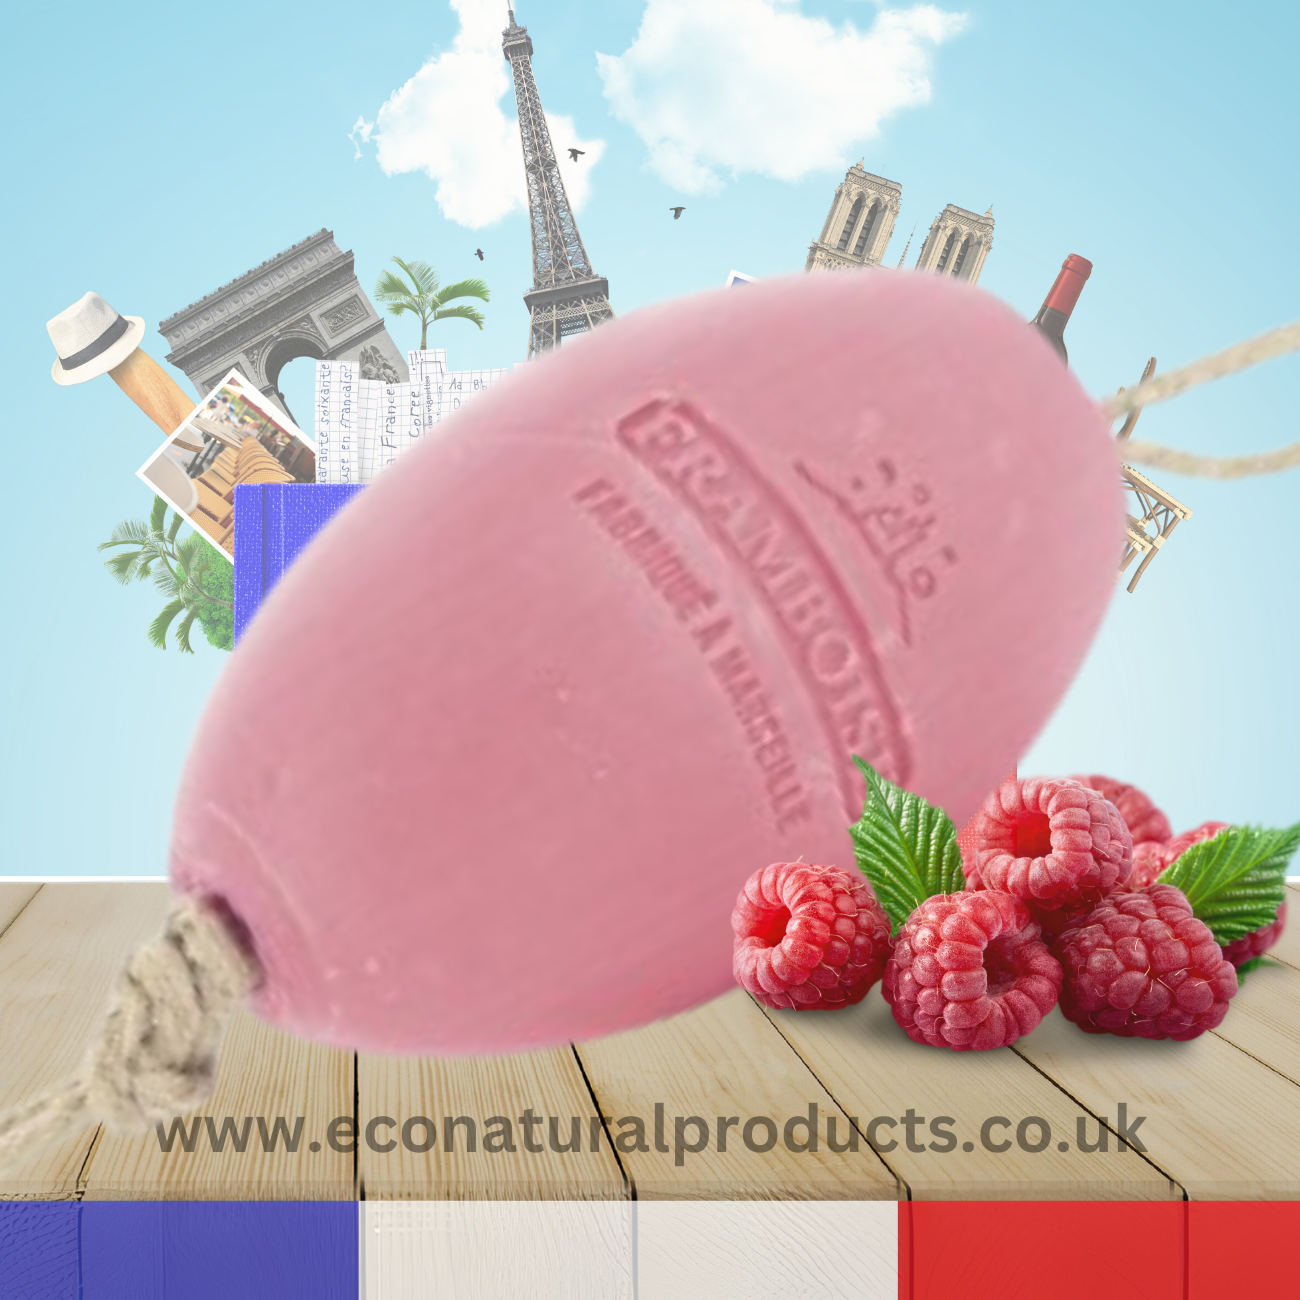 Oval Soap With Cord Framboise (Raspberry) 240g